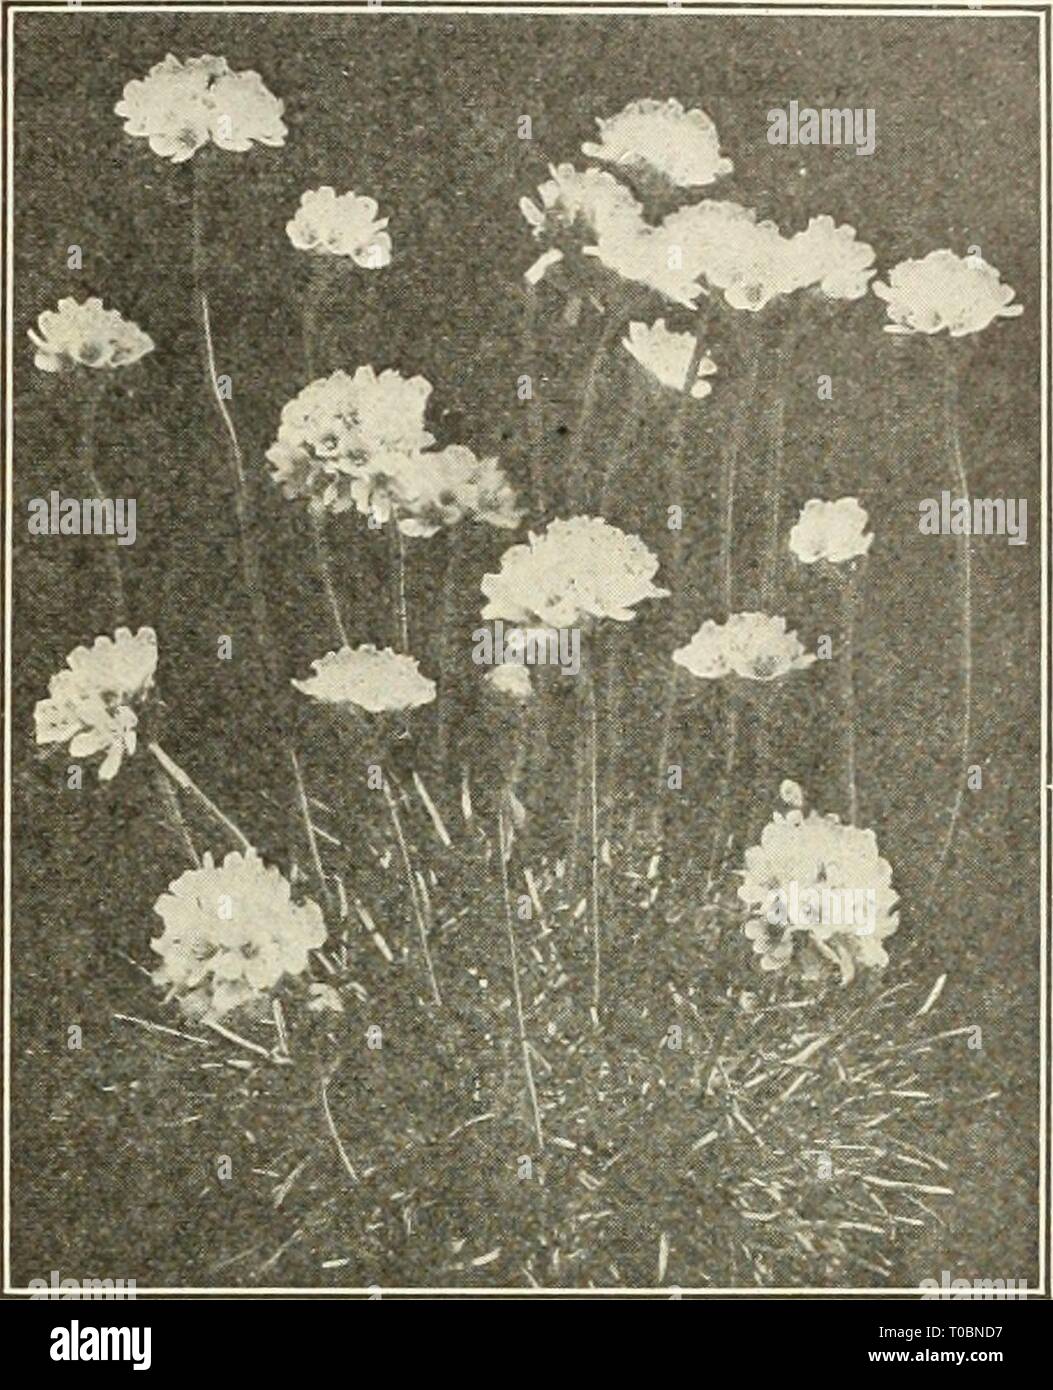 Dreer's garden book 1925 (1925) Dreer's garden book 1925 dreersgardenbook1925henr Year: 1925  /flEinyAJREEH^ HARDY PERENNIAL PIANTS &gt;HIMIIEIJ'IMlk) 171 ArabiS (Rock Cress) Alpina. One of the most desirable of the very early spring-flowering plants that is especially adapted for edging and for the rock garden, but does equally weU in the border, forming a dense carpet, completely covered with pure white flowers. It is nice for cutting, and lasts for a long time in bloom. 25 cts. each; S2.50 per doz.; $15.00 per 100. — Variegata. Same as above but with the foliage prettily variegated with cre Stock Photo